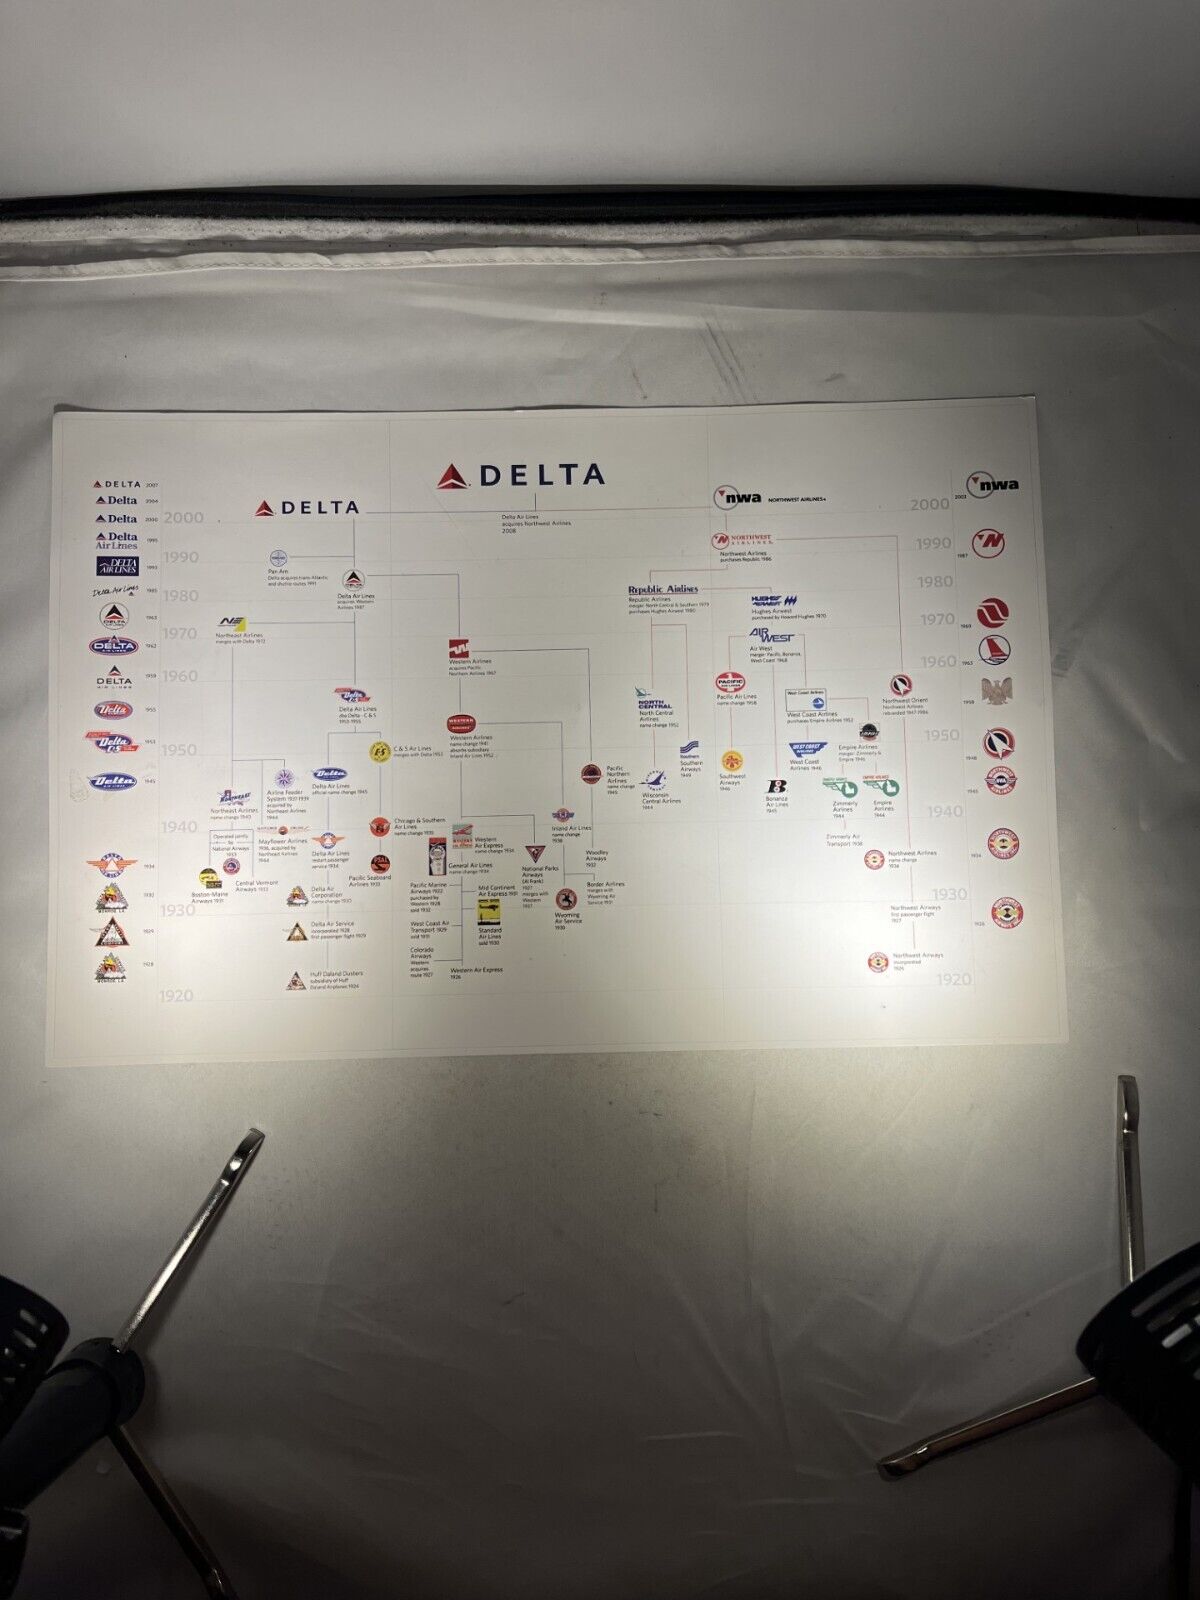 Delta Air Lines Family Tree Merger's 10th Anniversary Poster 1920-2000   V